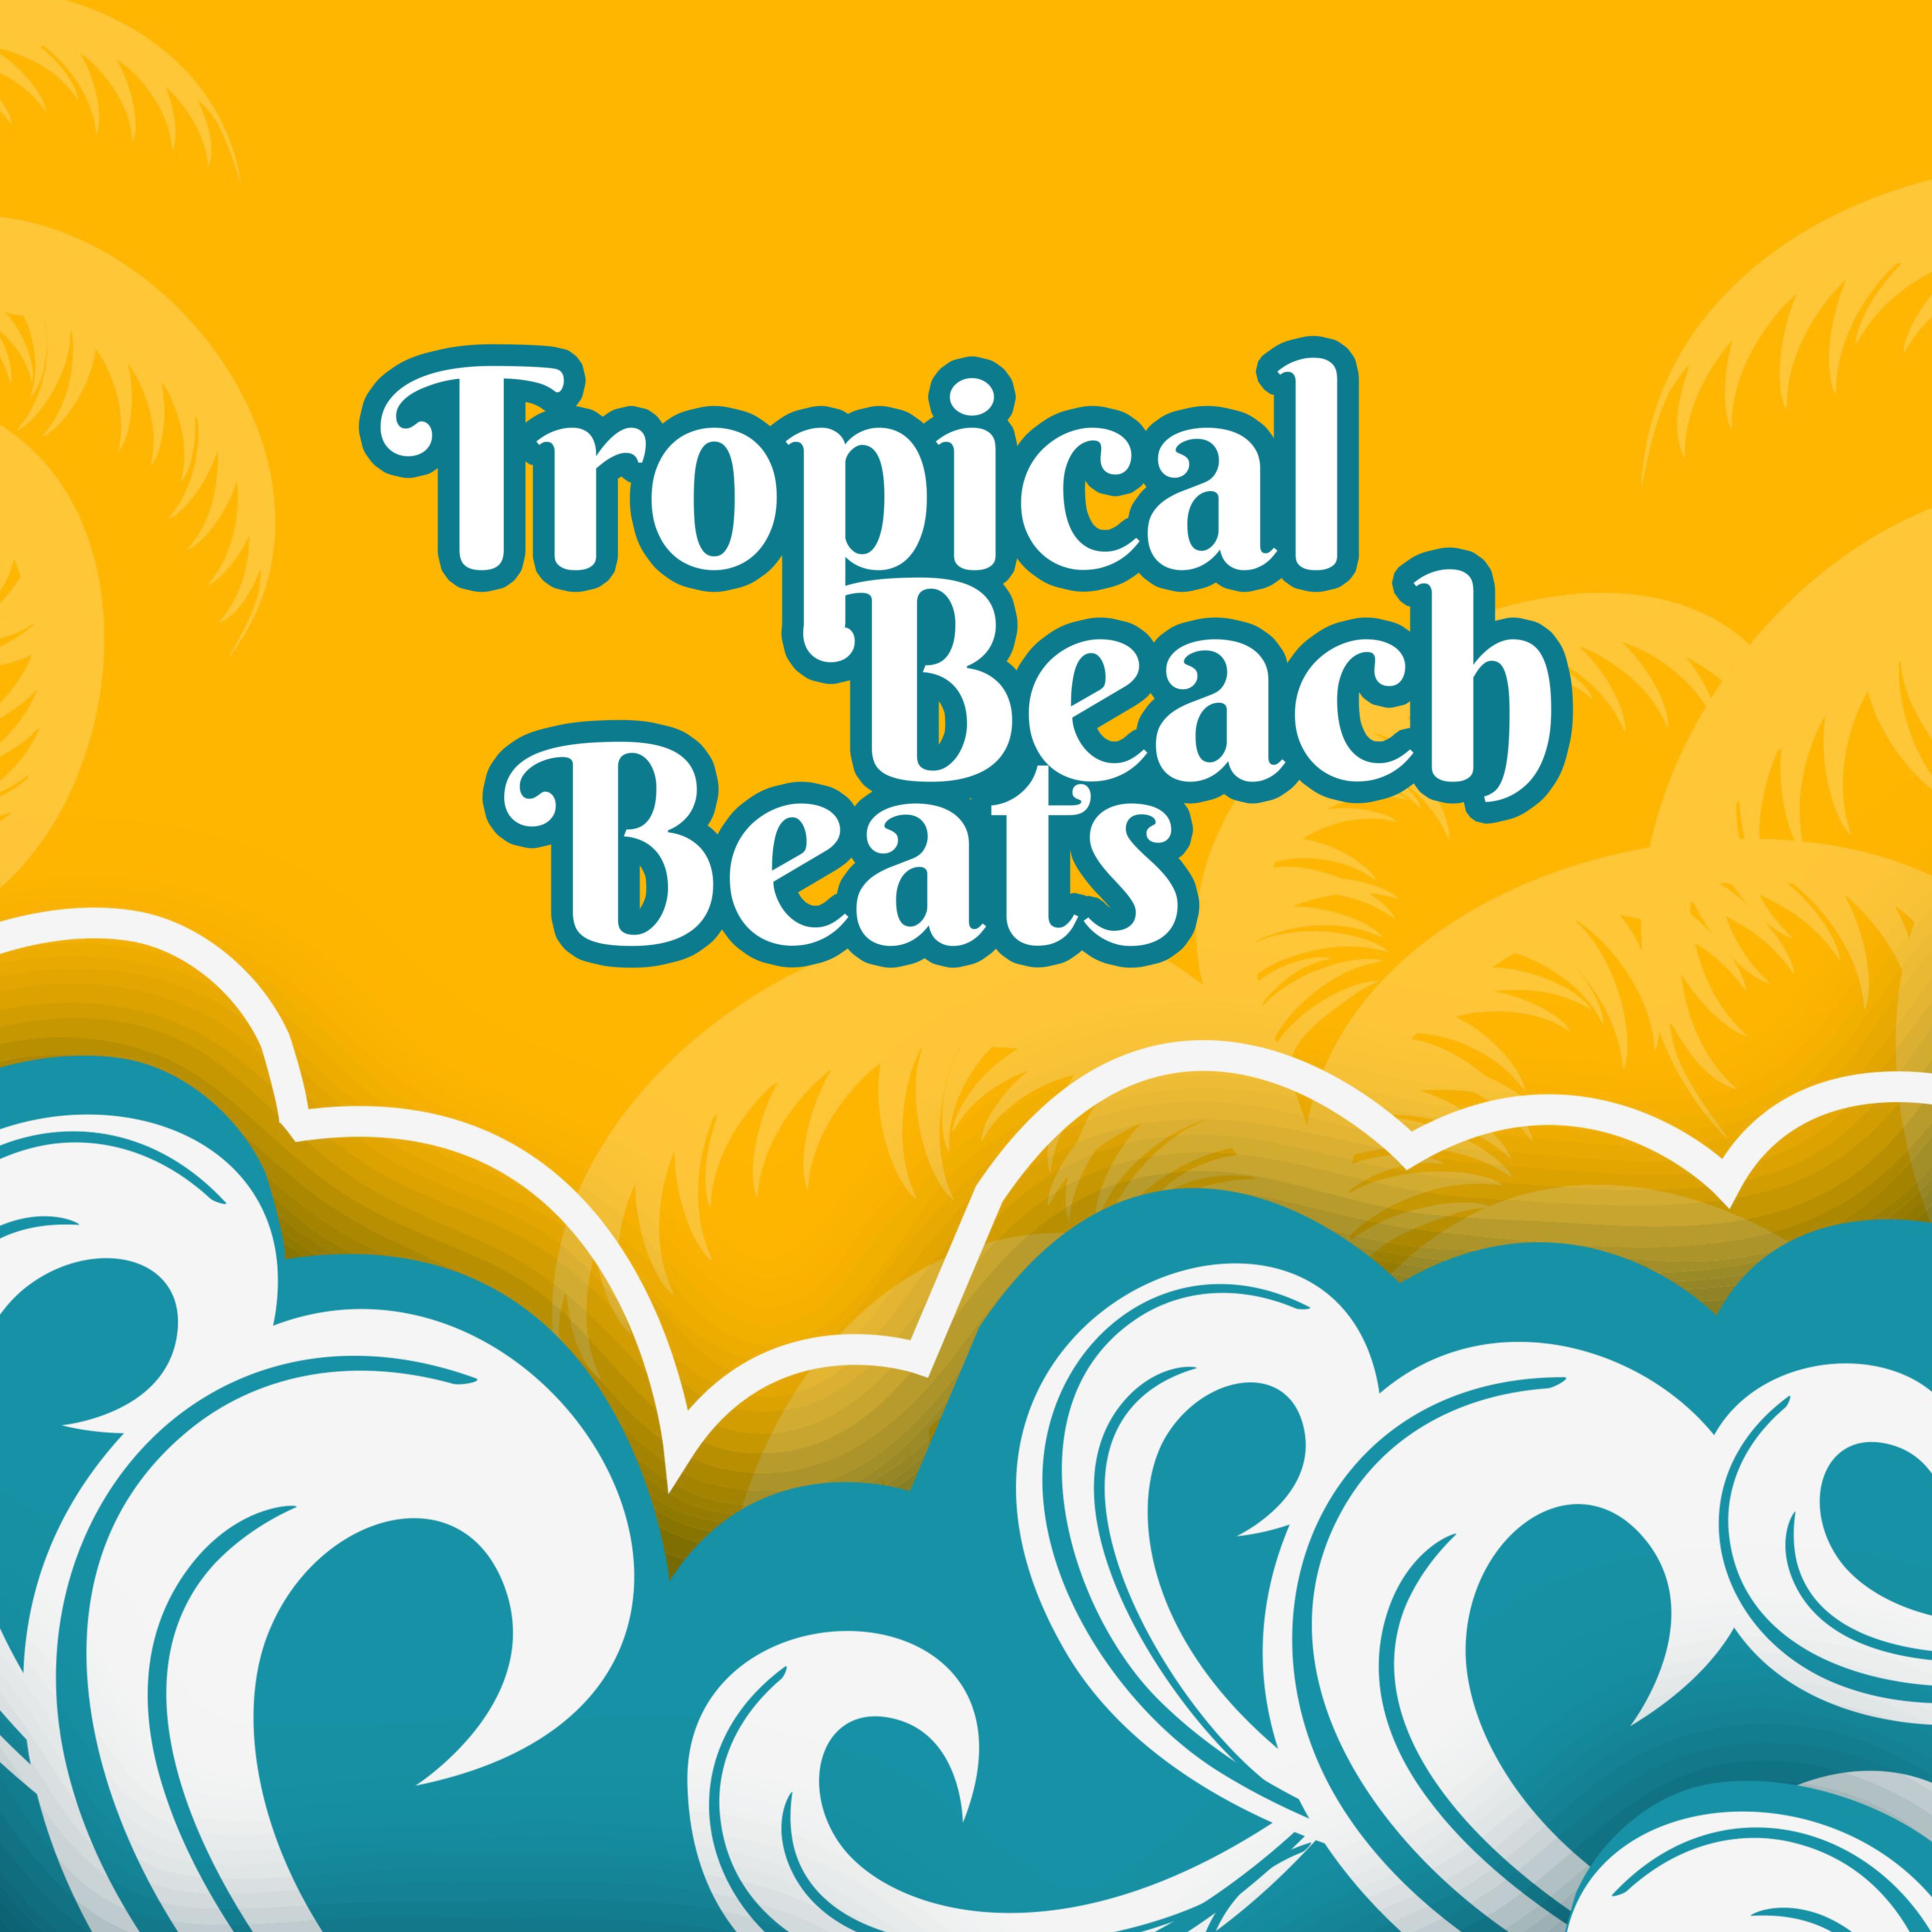 Tropical Beach Beats  Summer Rest, Easy Listening, Peaceful Mind  Body, Chill Out Rhythms